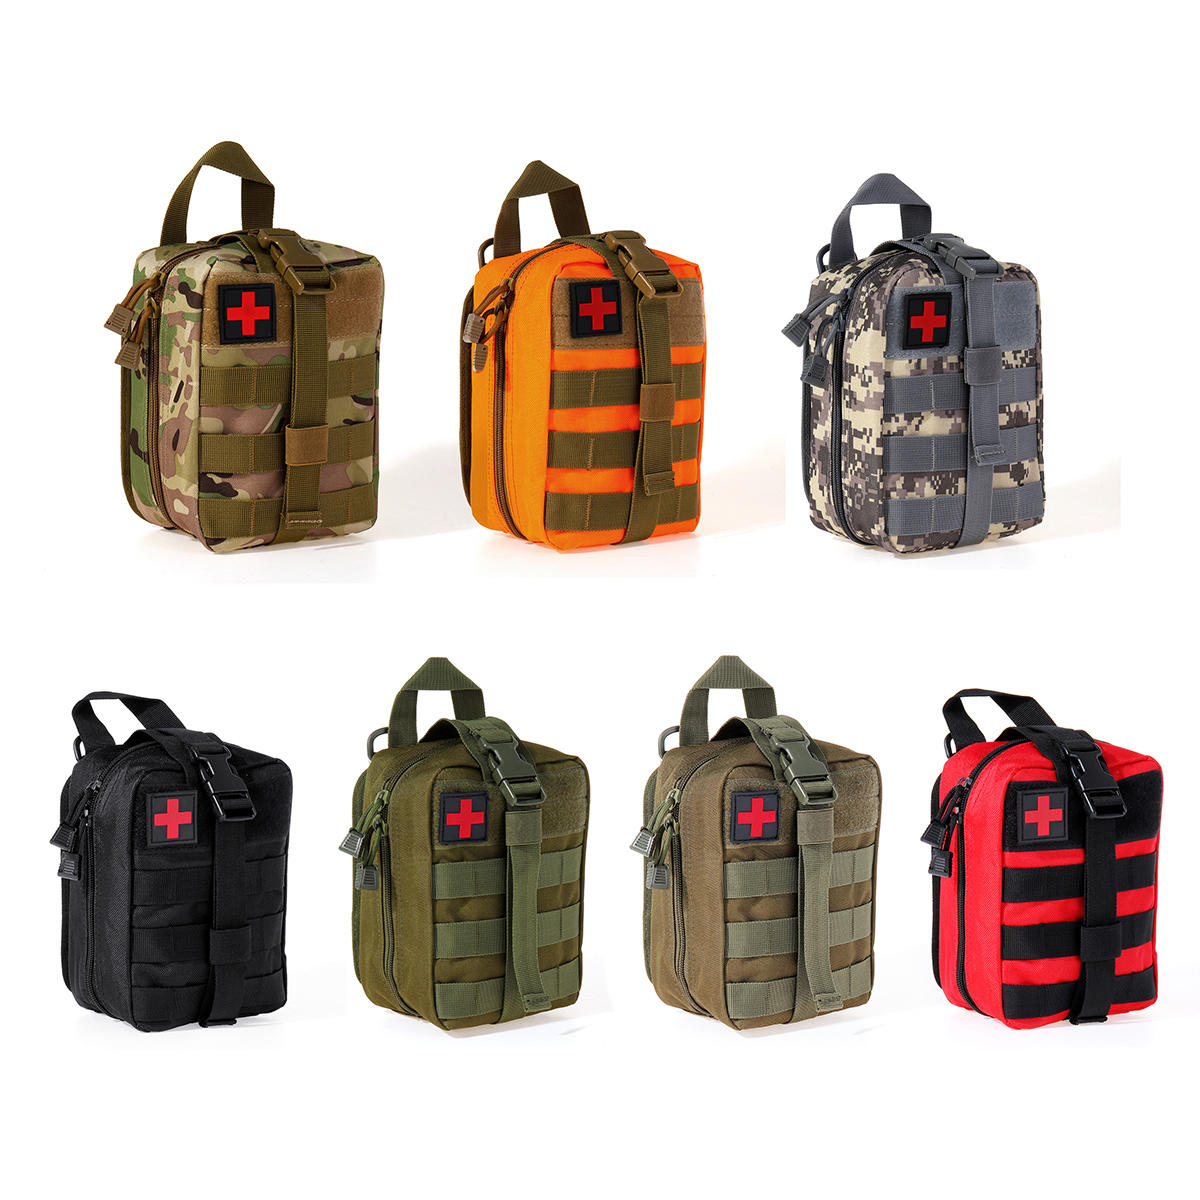 

EMT Emergency Rescue Survival Pouch Climbing Bag Medical Package Tactical Molle 7ColorsFirst Aid Kit Bag